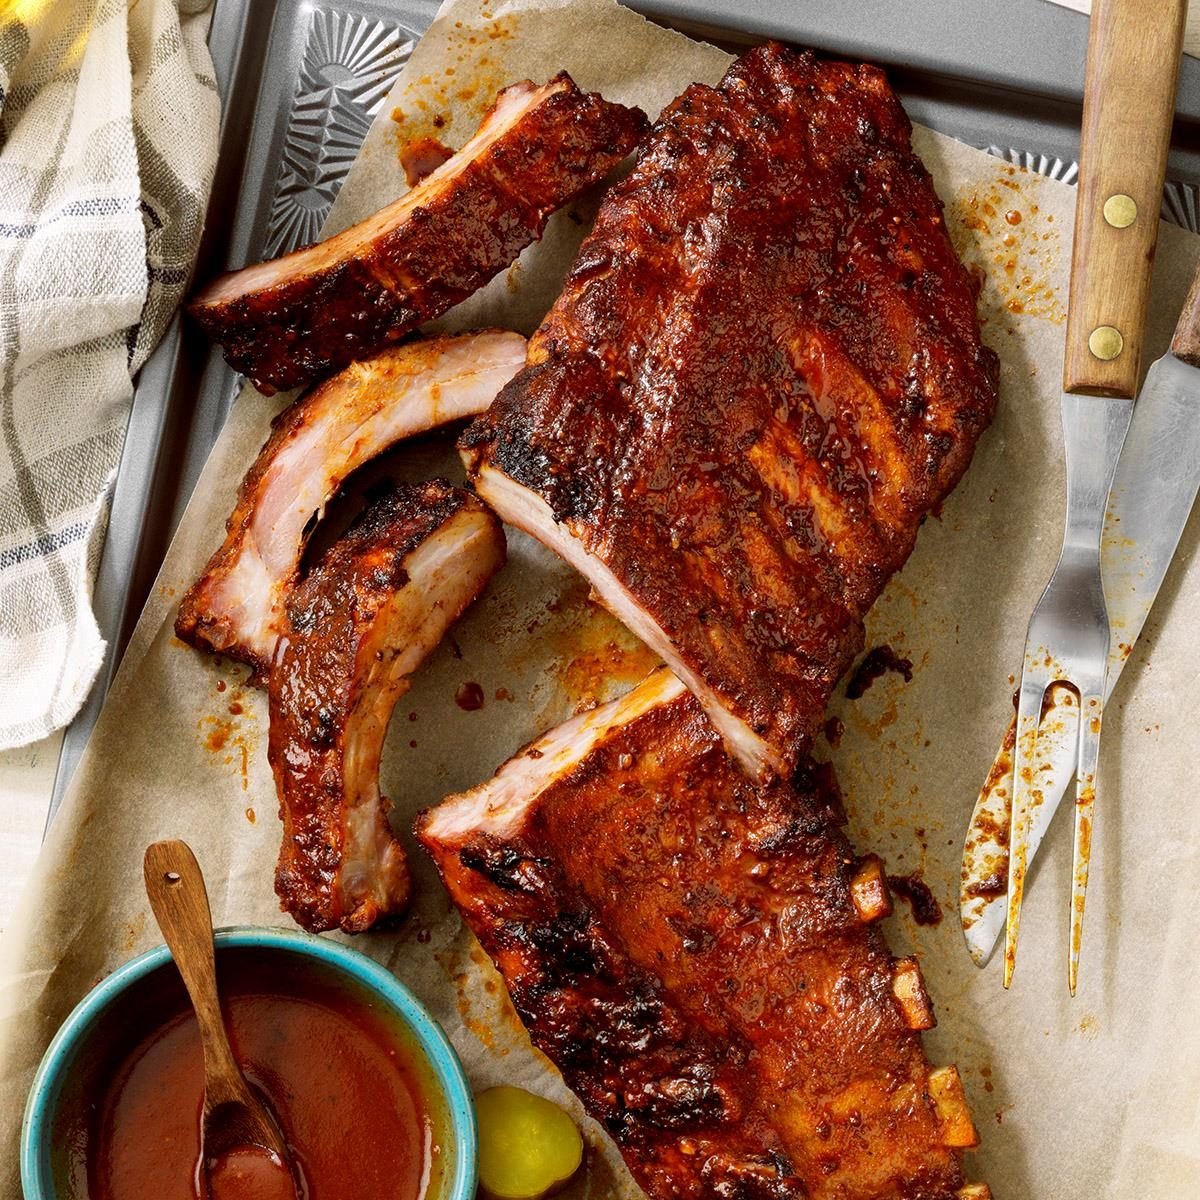 The Best Baby Back Ribs Recipe Taste Of Home,Queen Size Comforter Dimensions In Inches